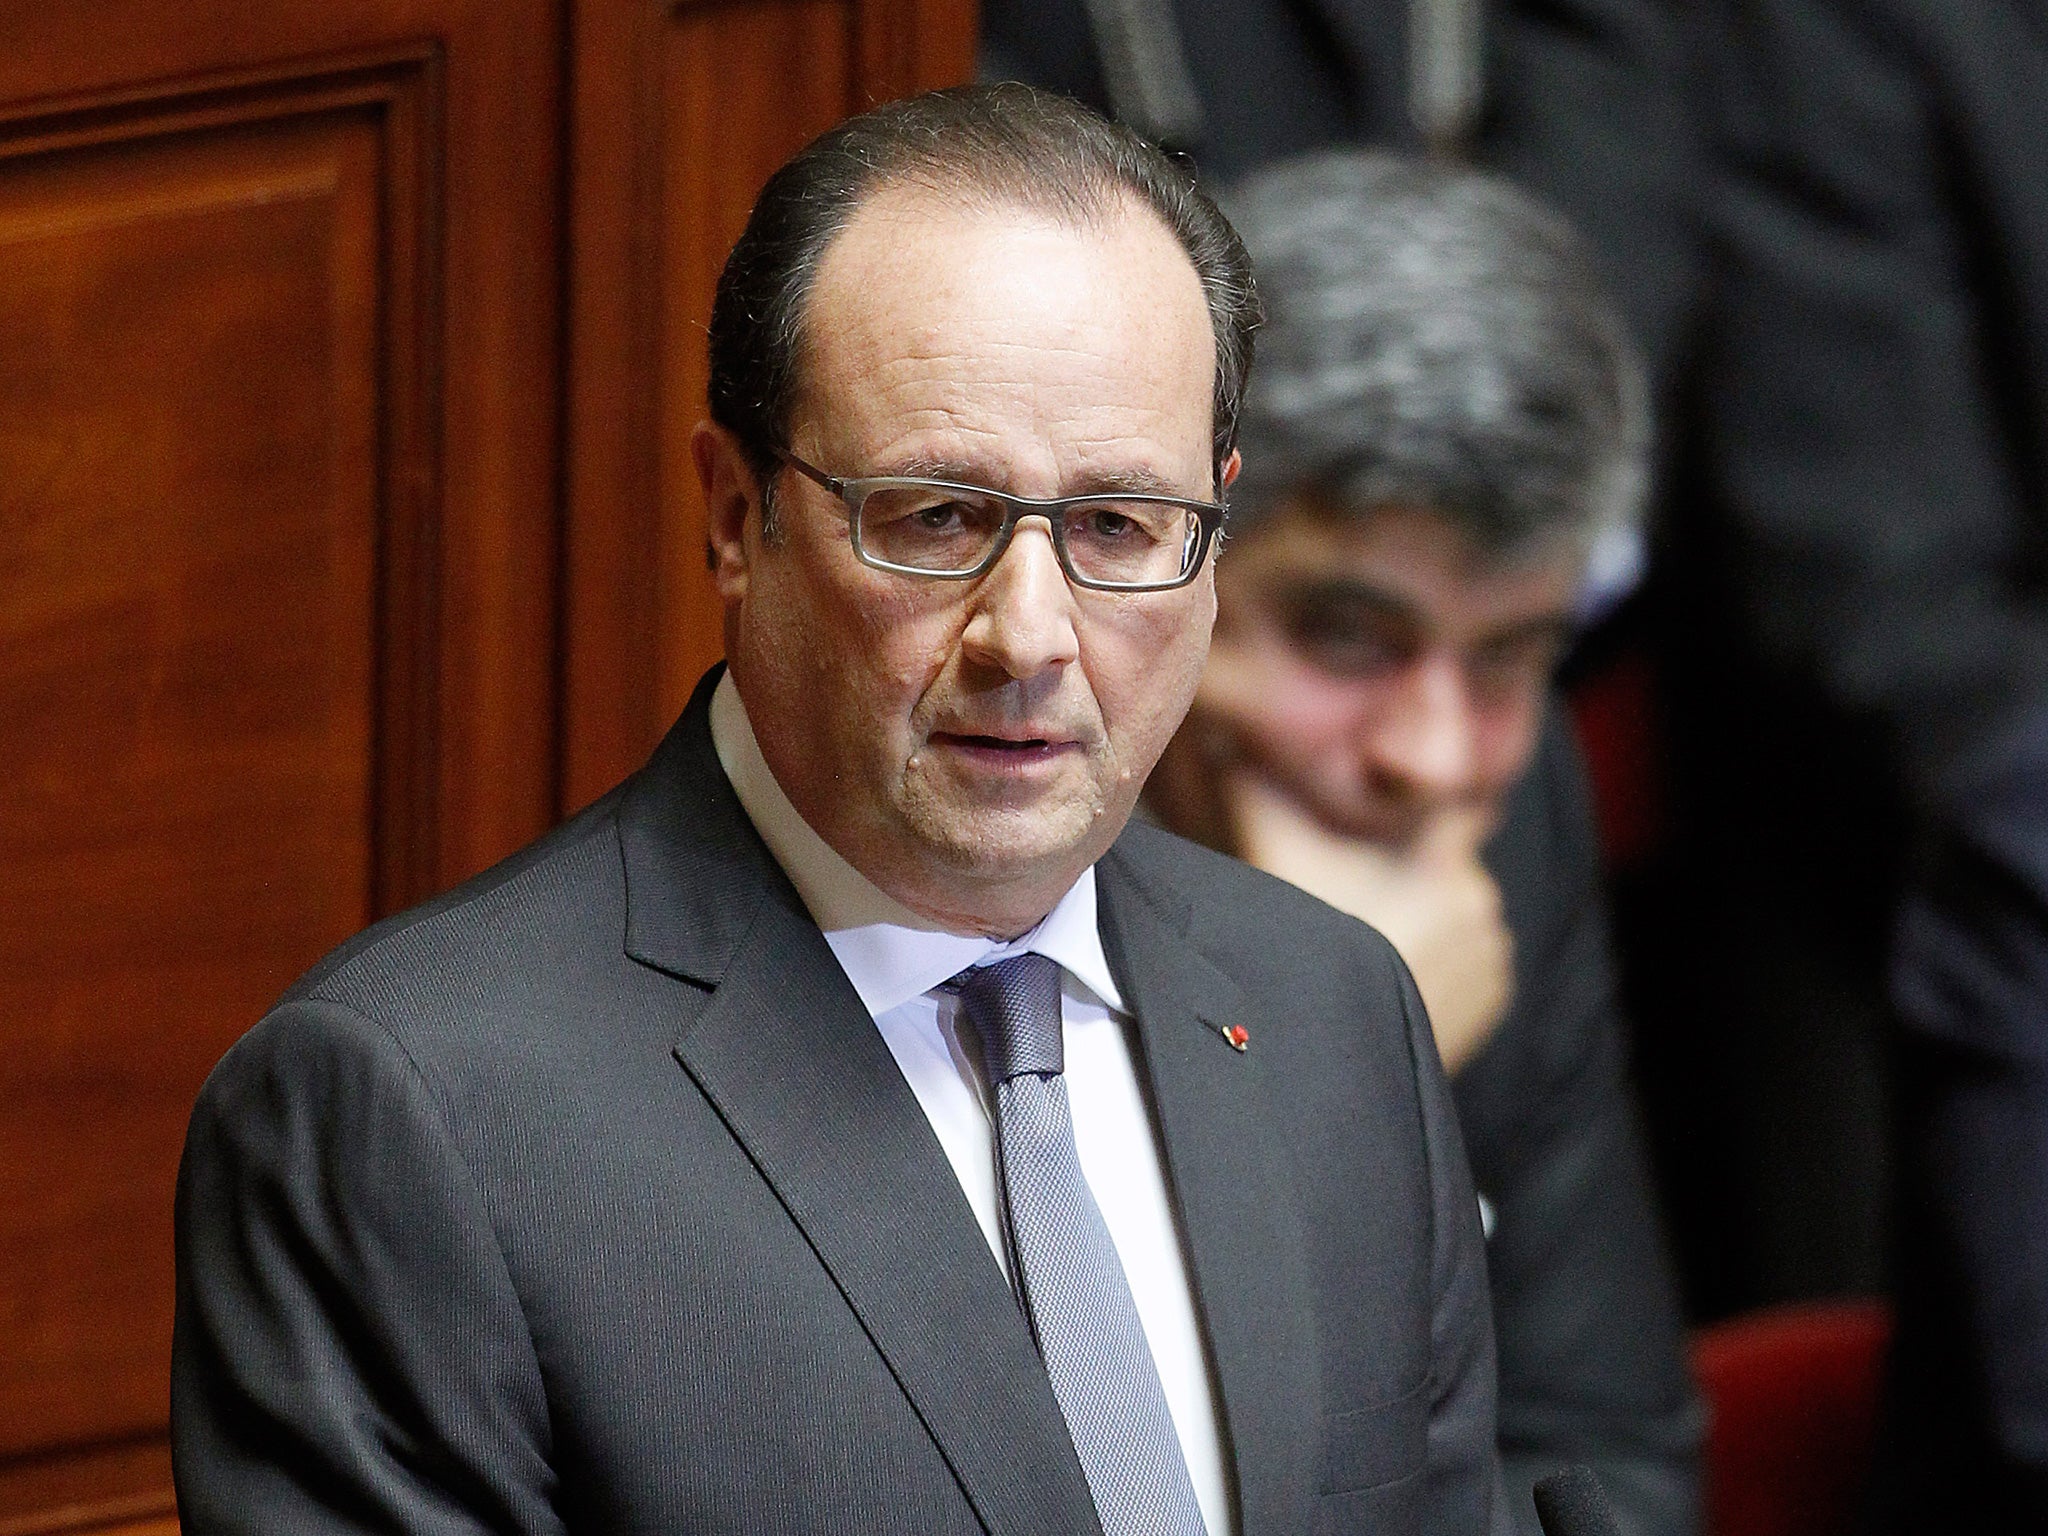 The French president has on issued two pardons since entering office in 2012